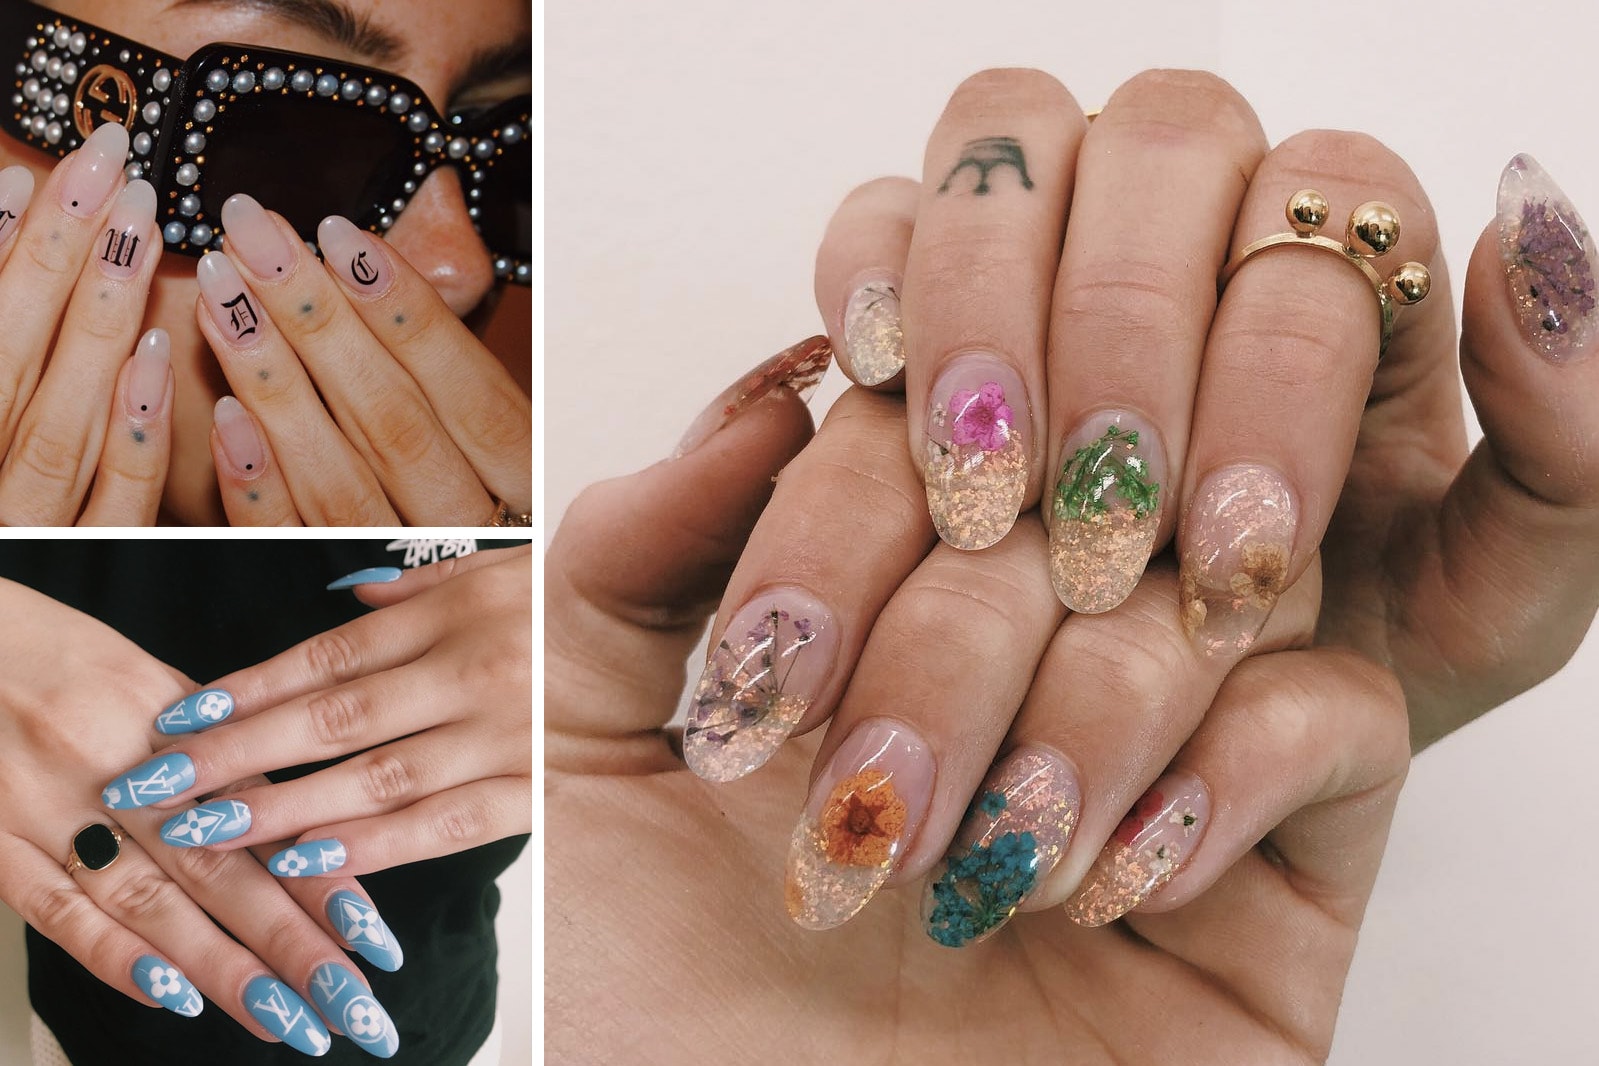 2. London's Top 10 Nail Art Salons for Crazy Designs - wide 8